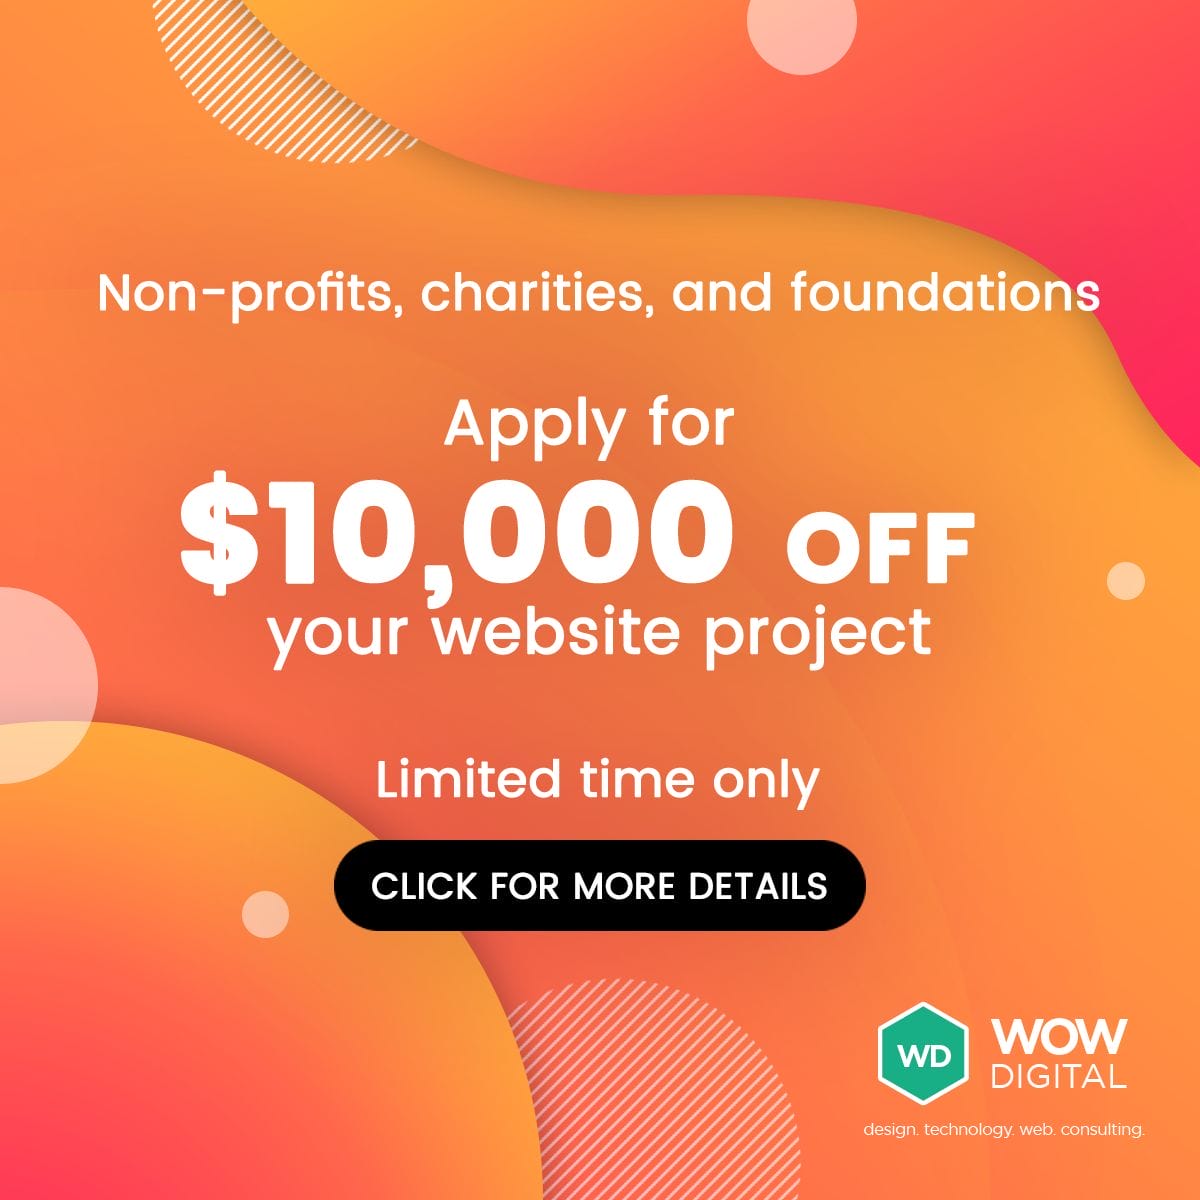 Apple for $10,000 off your website project